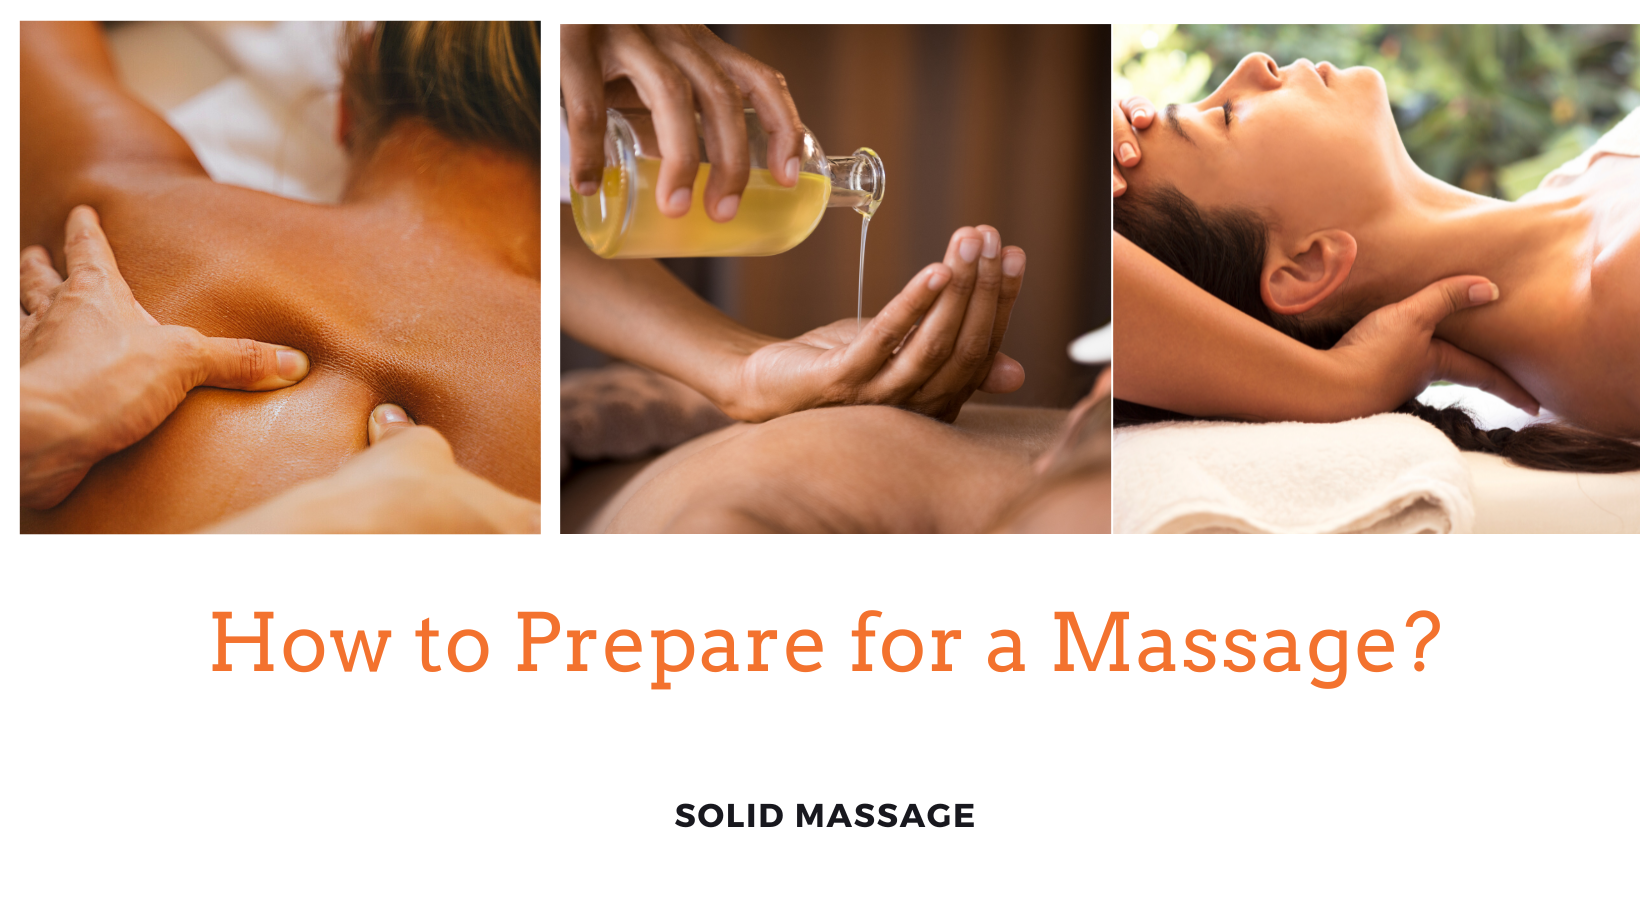 How to Prepare for a Massage